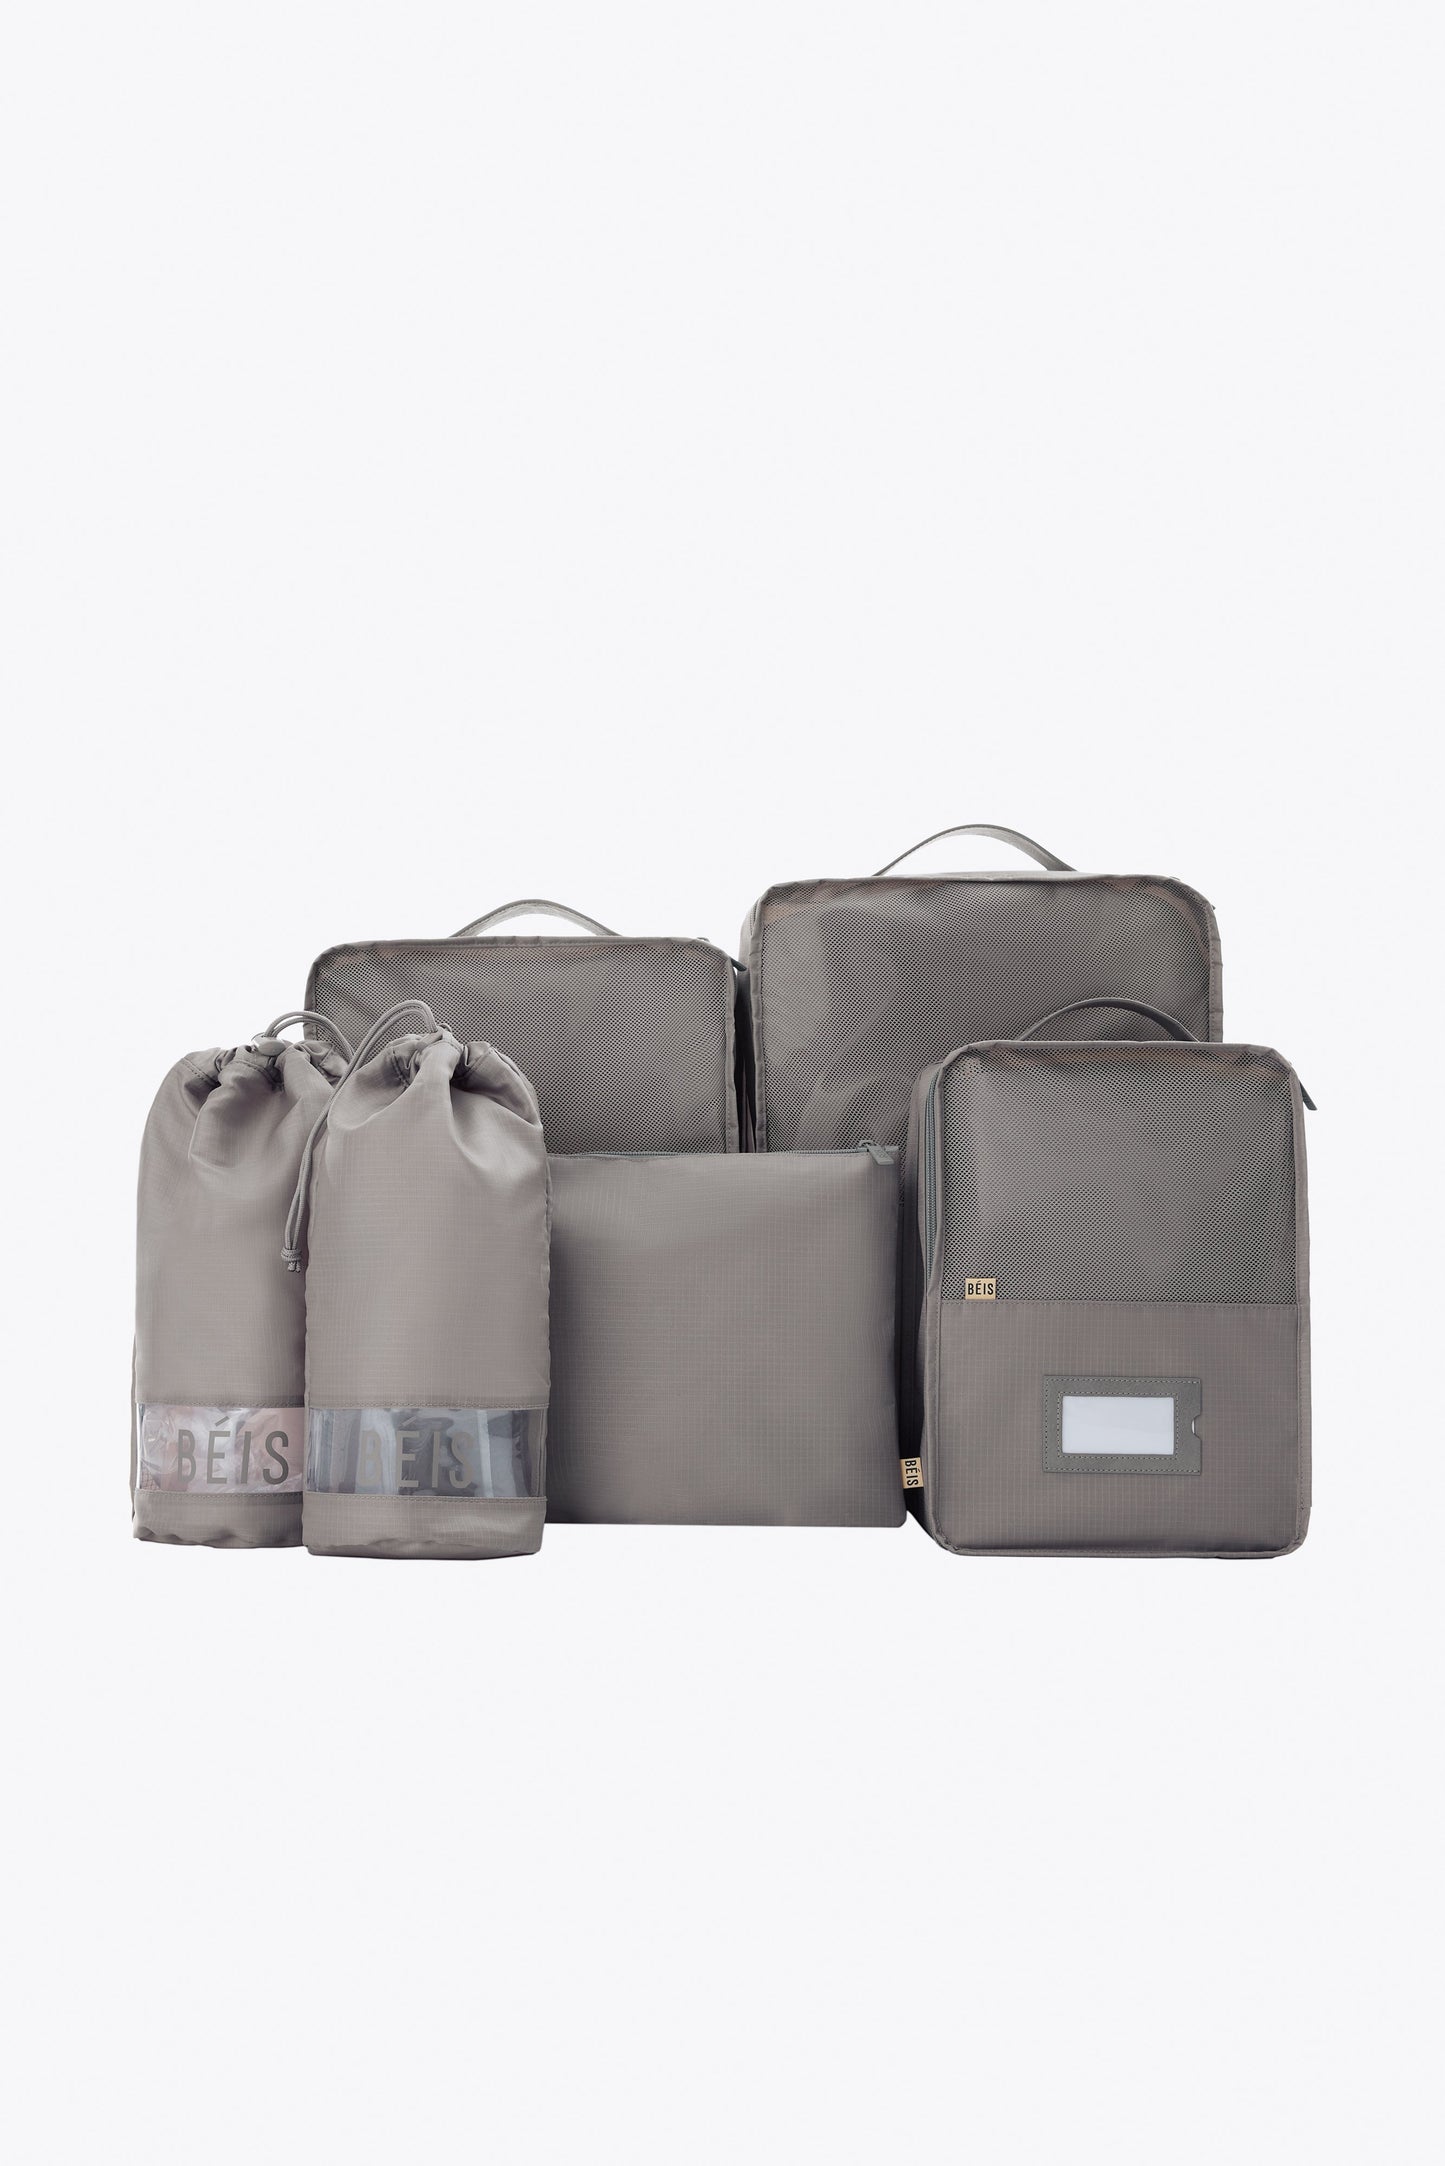 The Packing Cubes in Grey